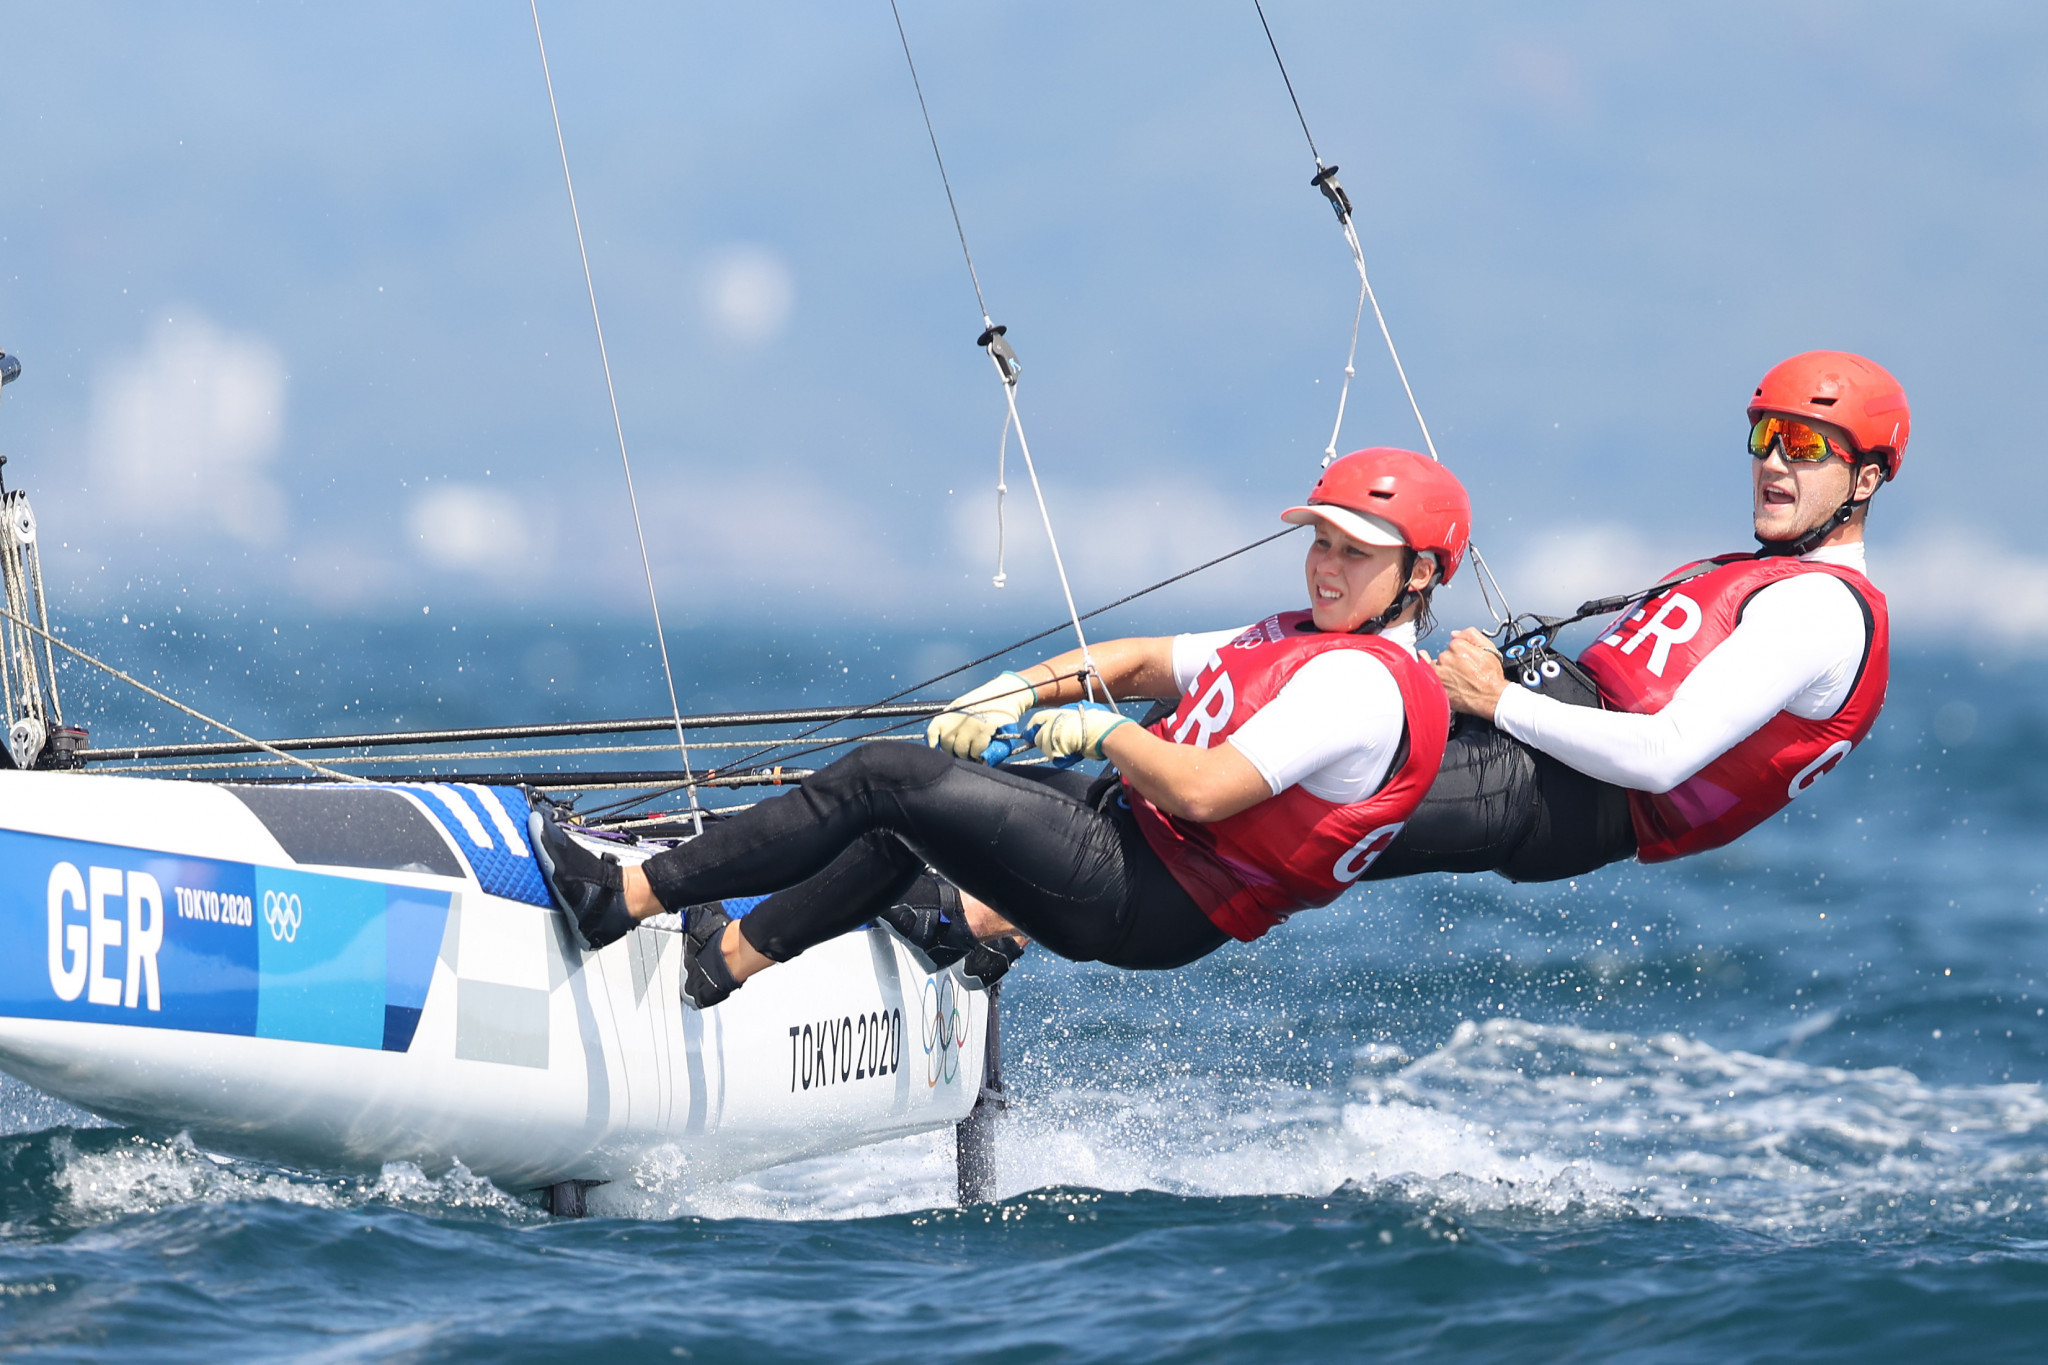 Germany's Paul Kohlhoff and Alicia Stuhlemmer lead in the Nacra 17 fleet at the World Championships in Mussanah ©Getty Images